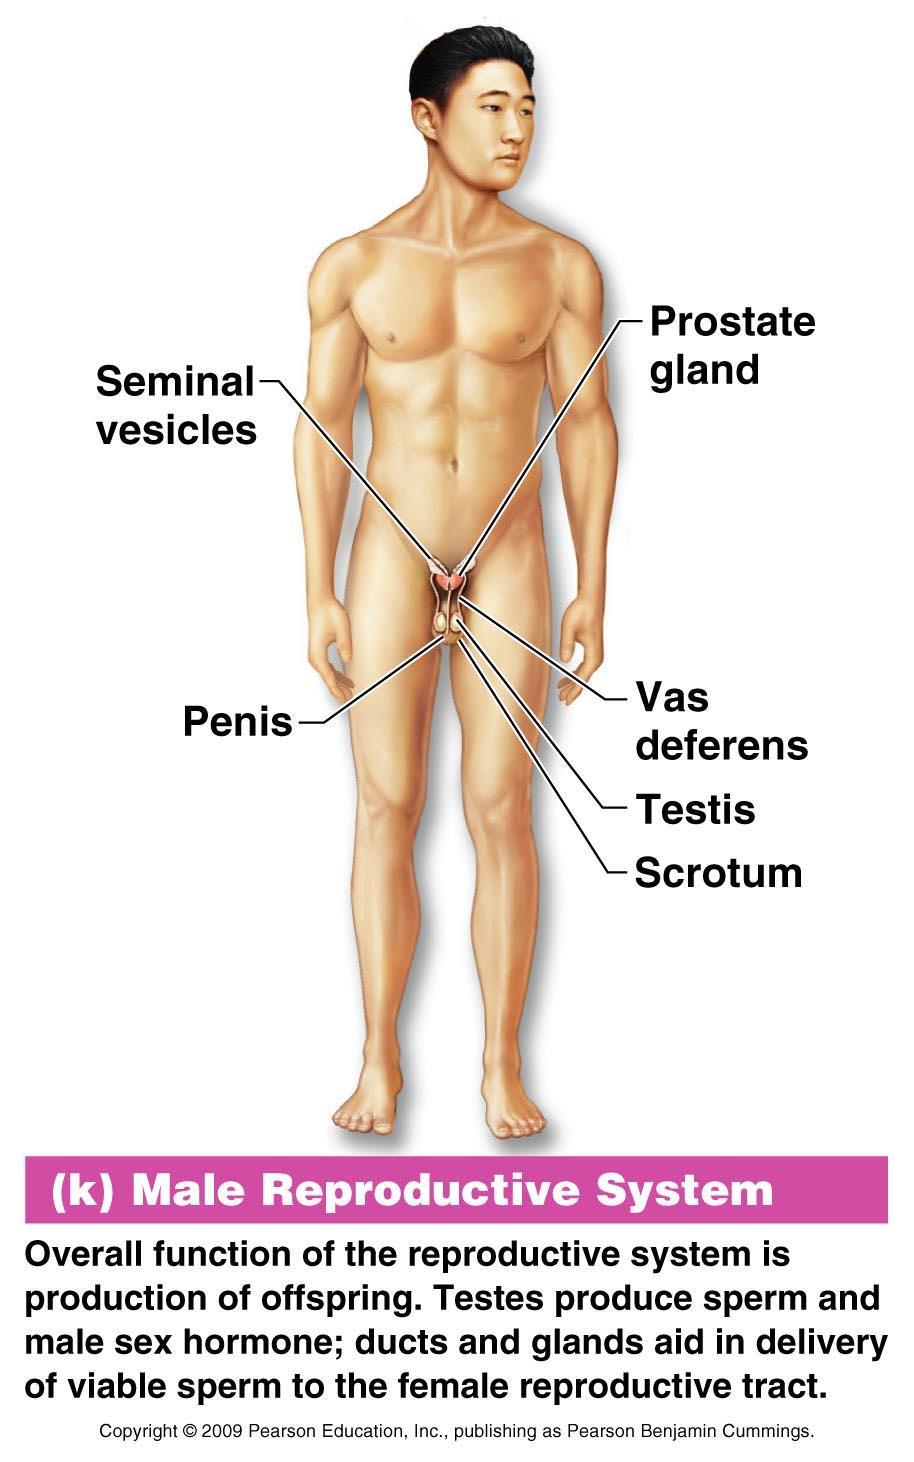 Organ System Overview Male Reproductive System Overall function is to produce offspring Testes produce